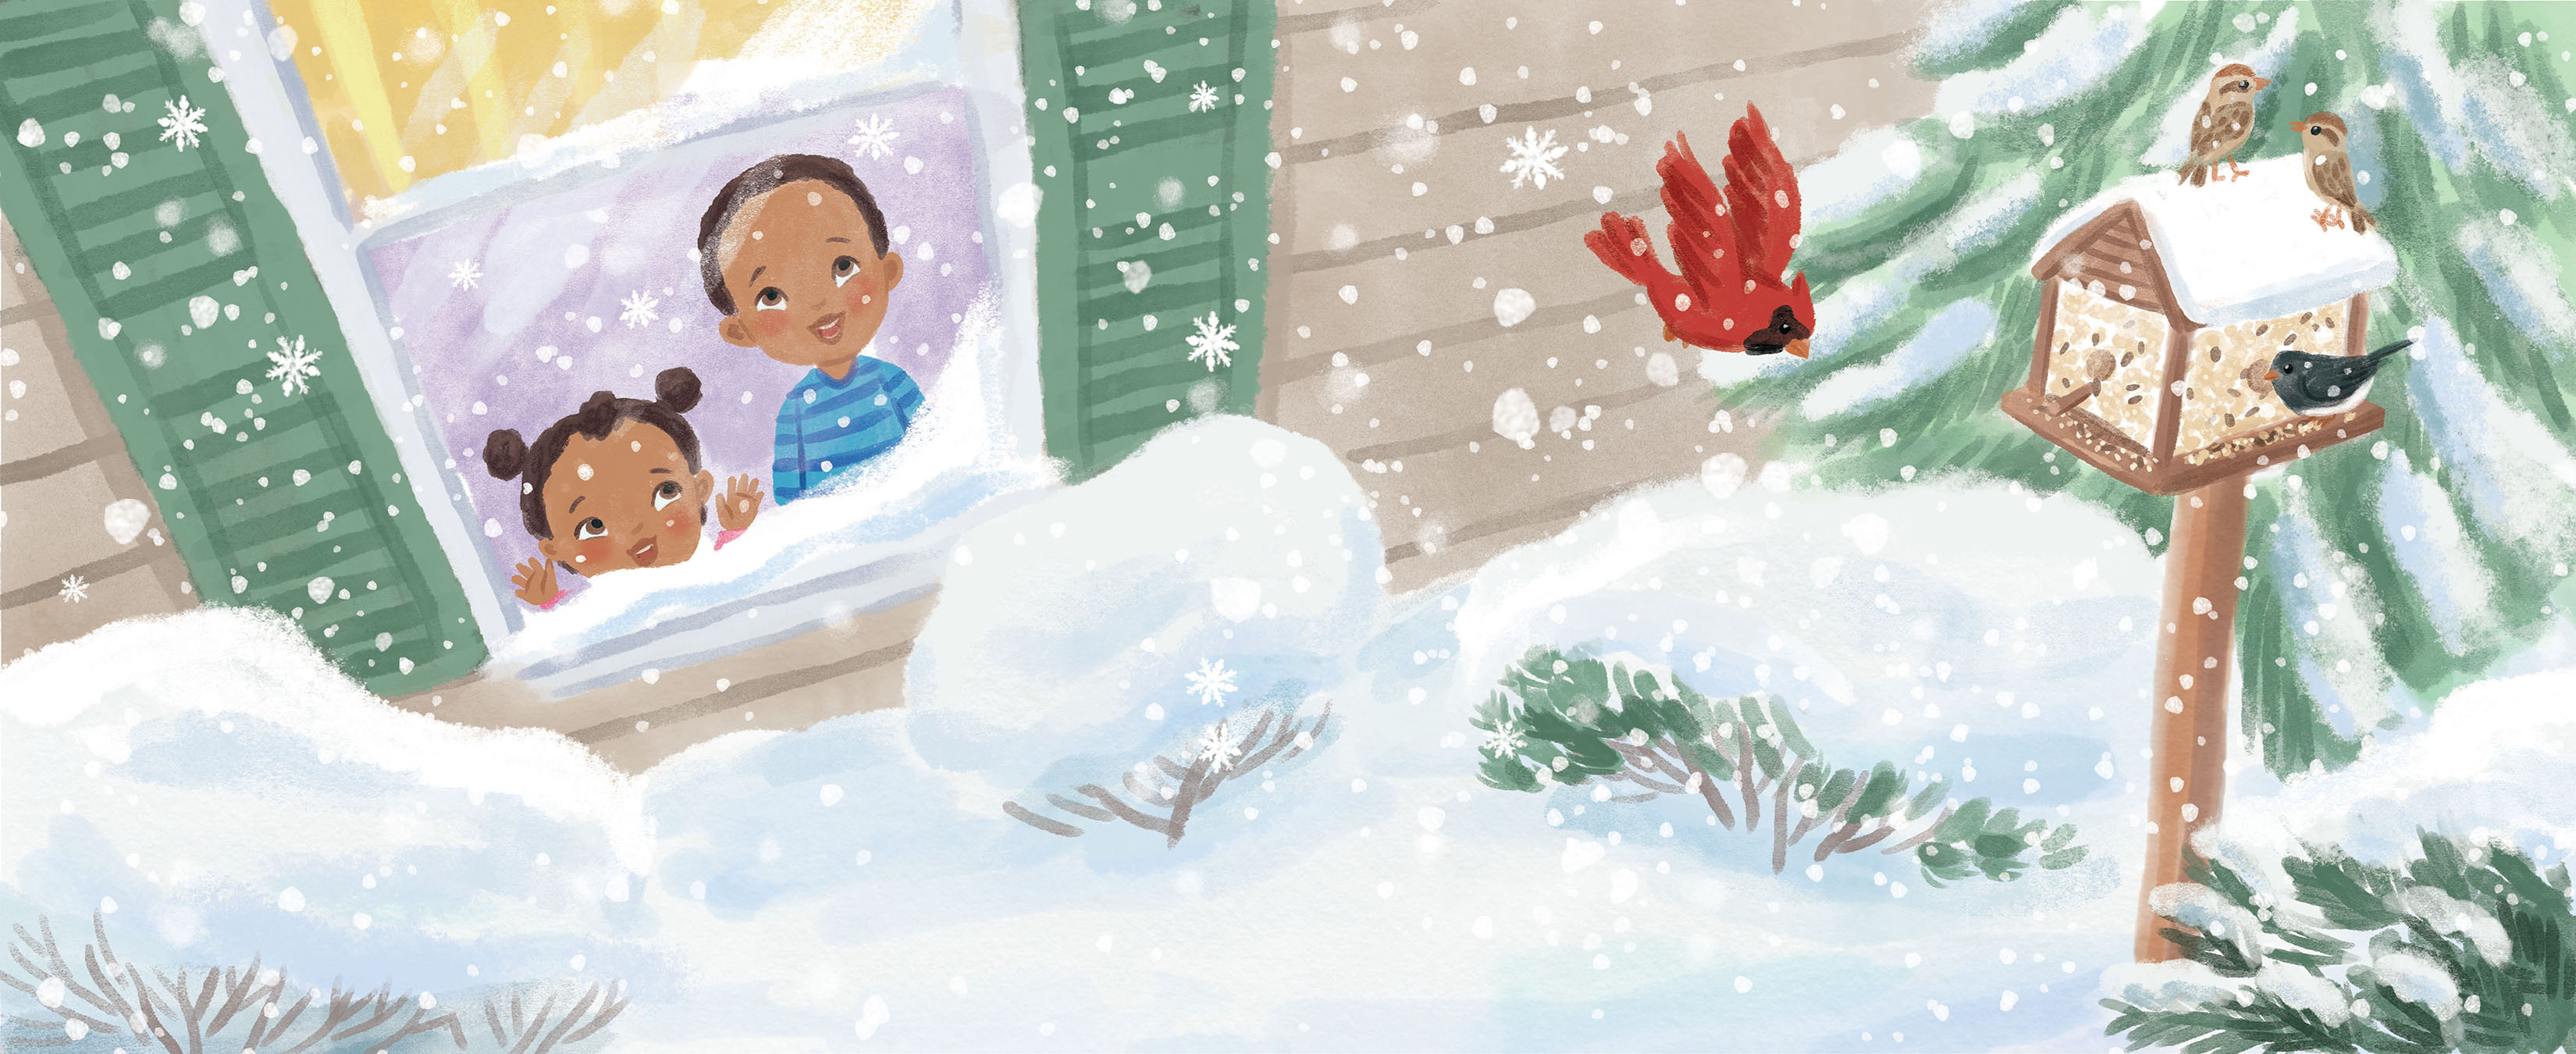 Illustration by Talitha Shipman of a young boy and girl looking out a window at a cardinal and the first snow. Illustration is called "First Snow"